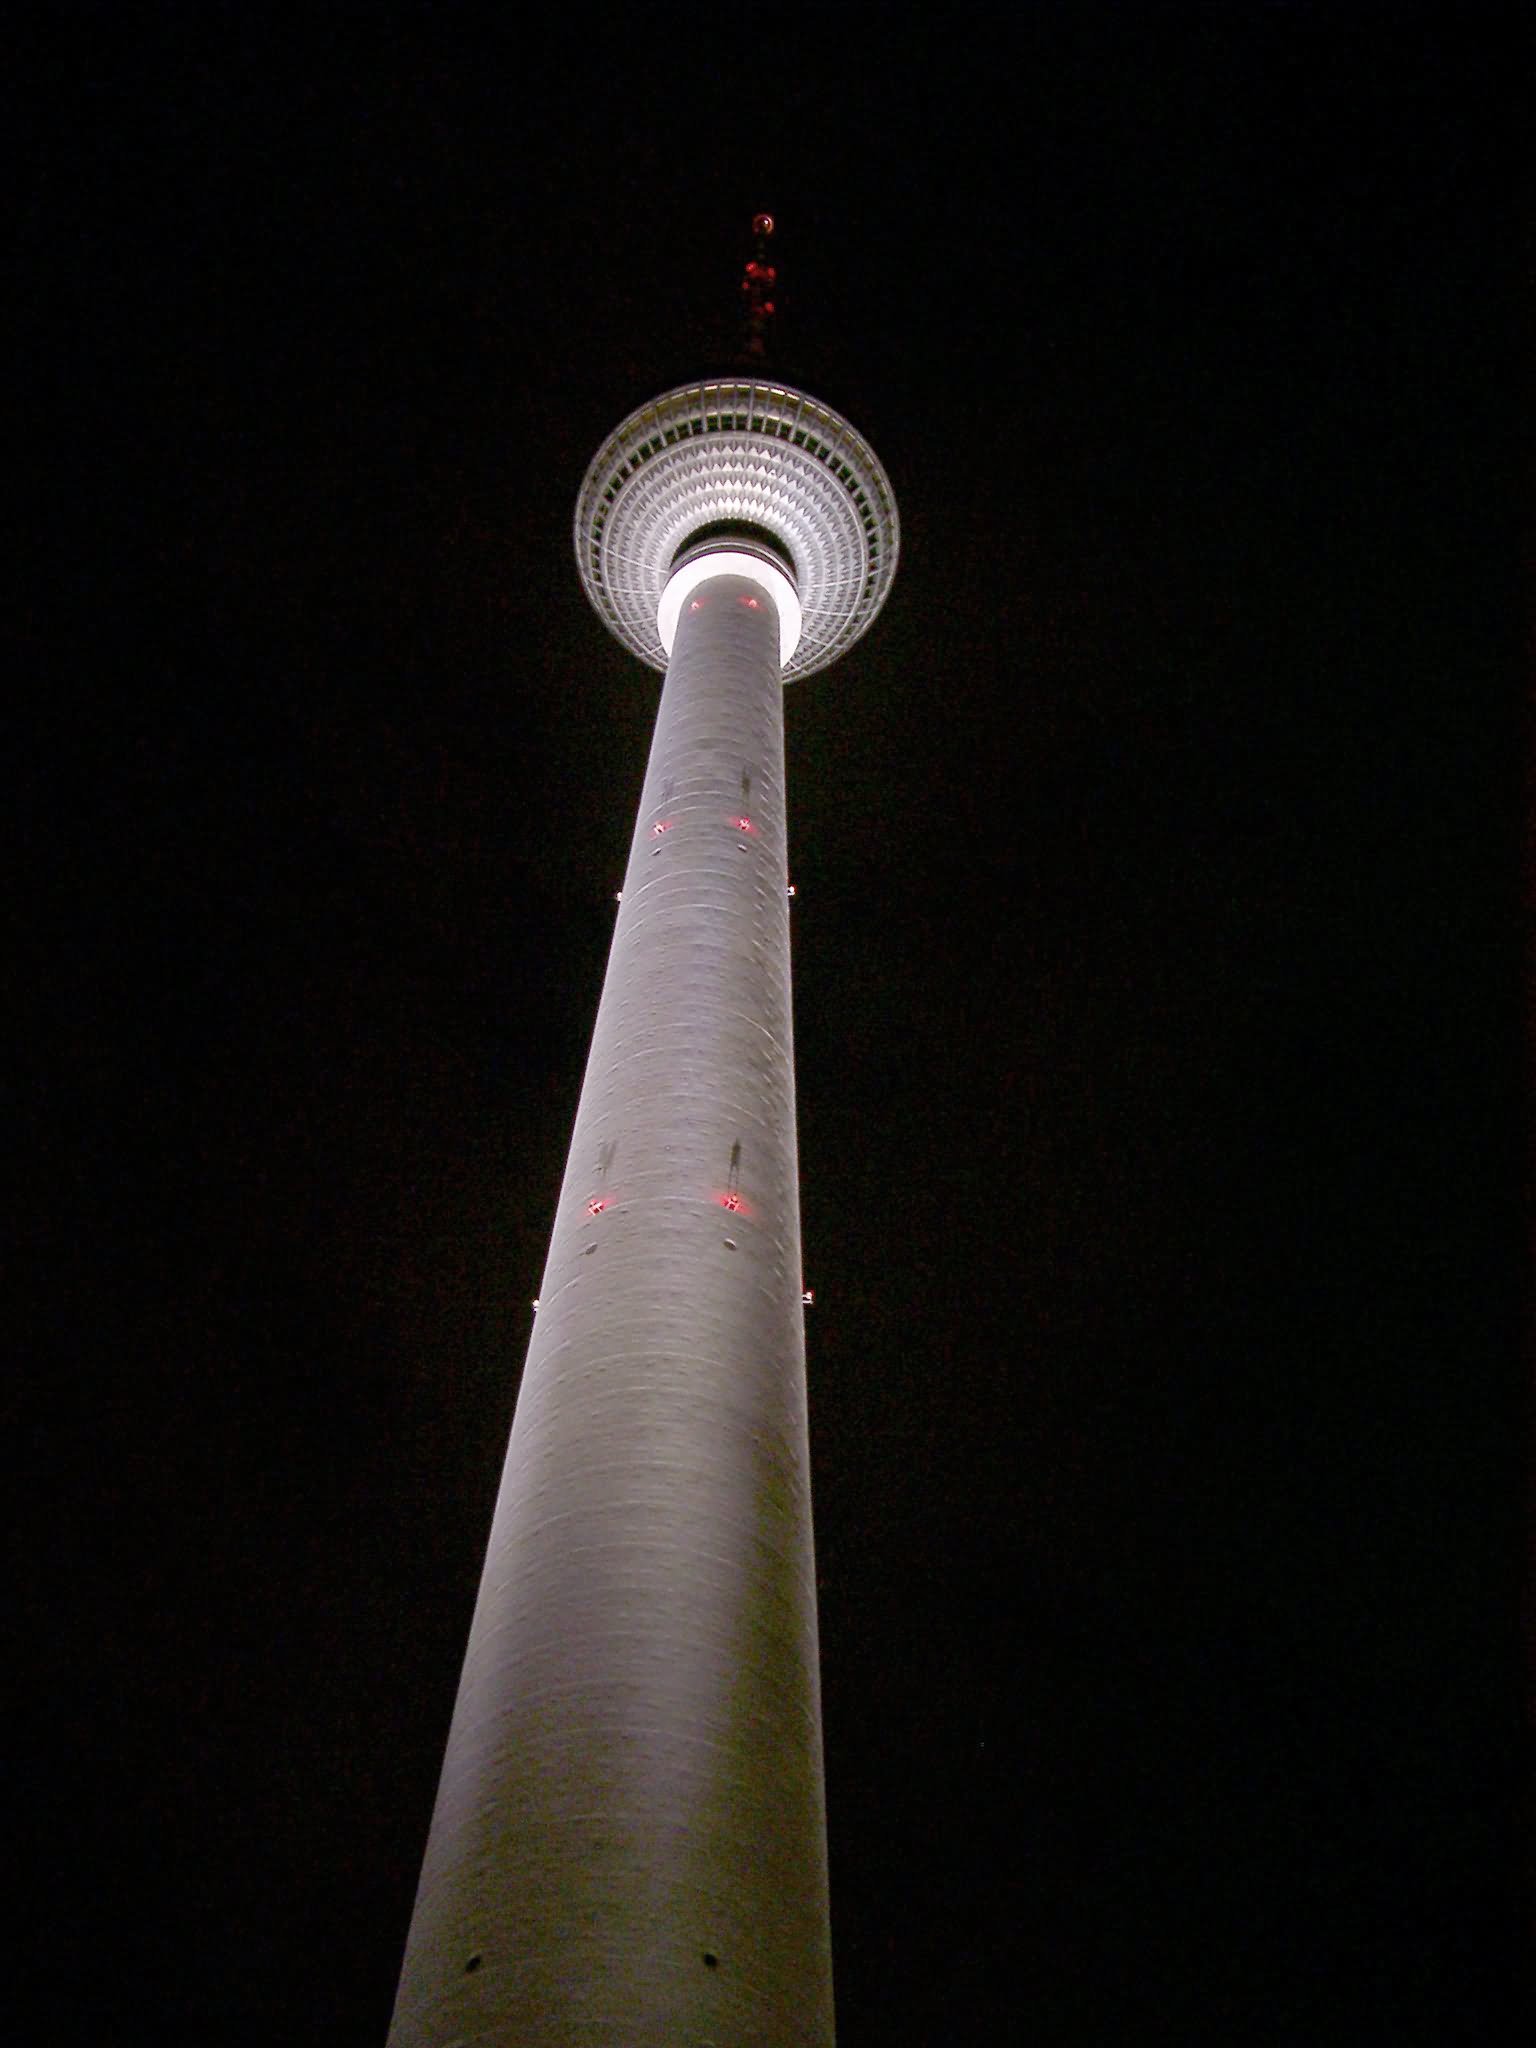 The Fernsehturm Tower View From Below At Night